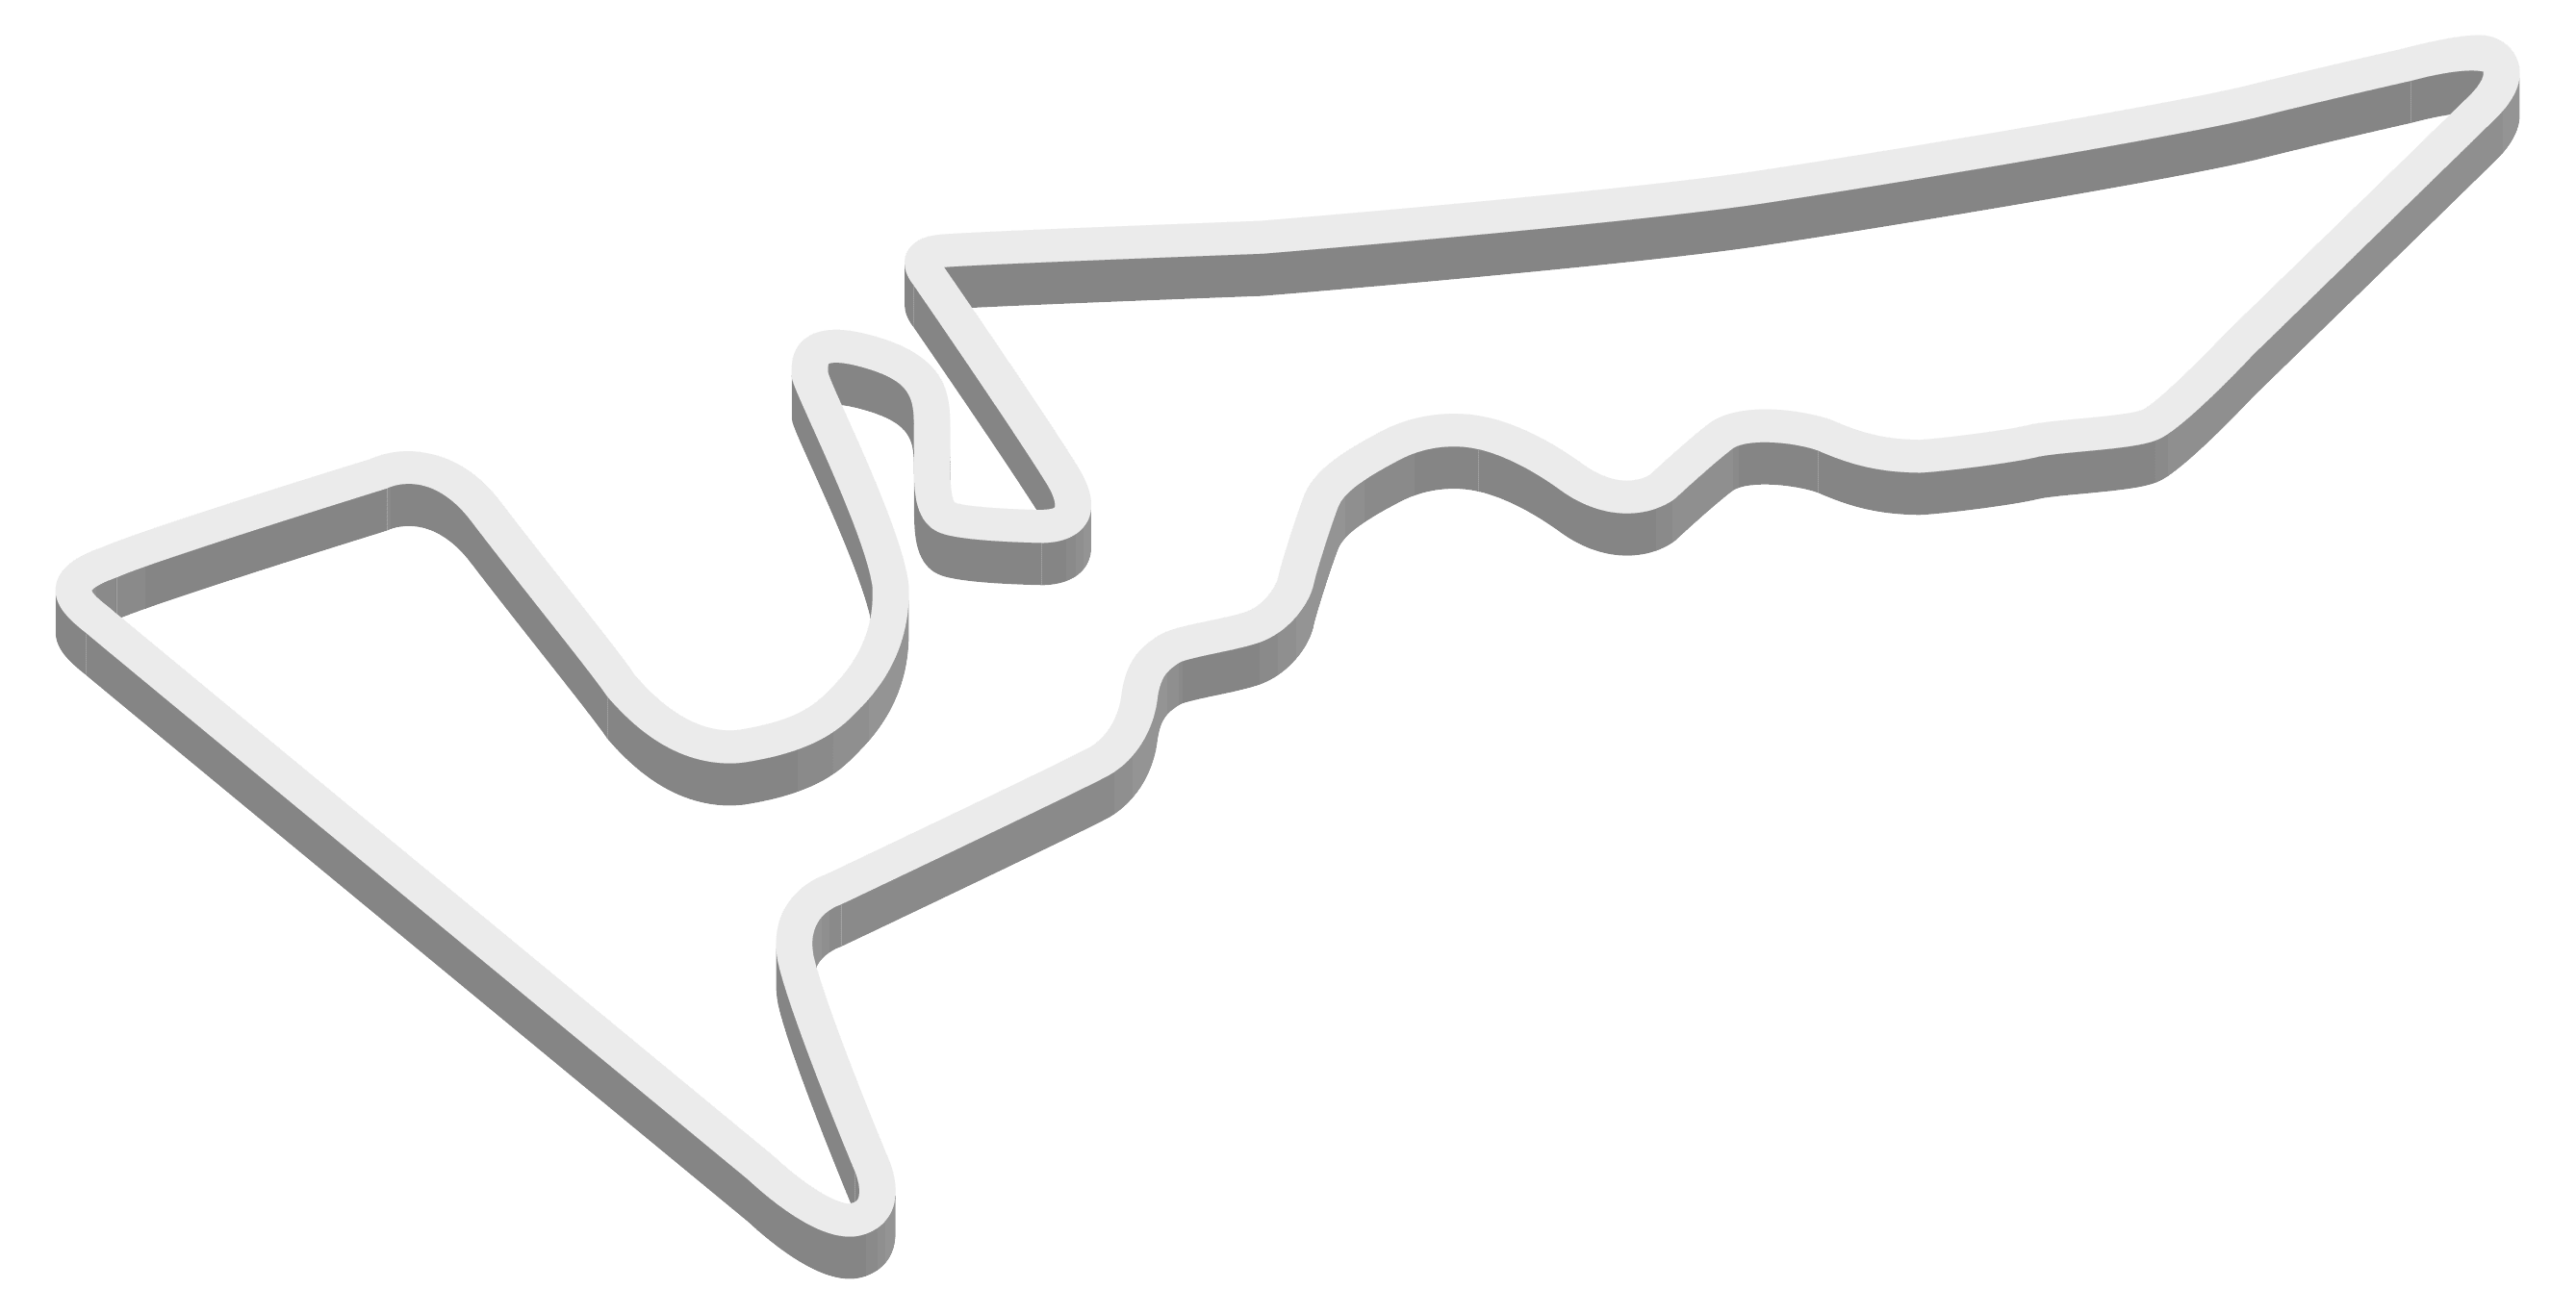 Circuit of the Americas - Racetrack Image